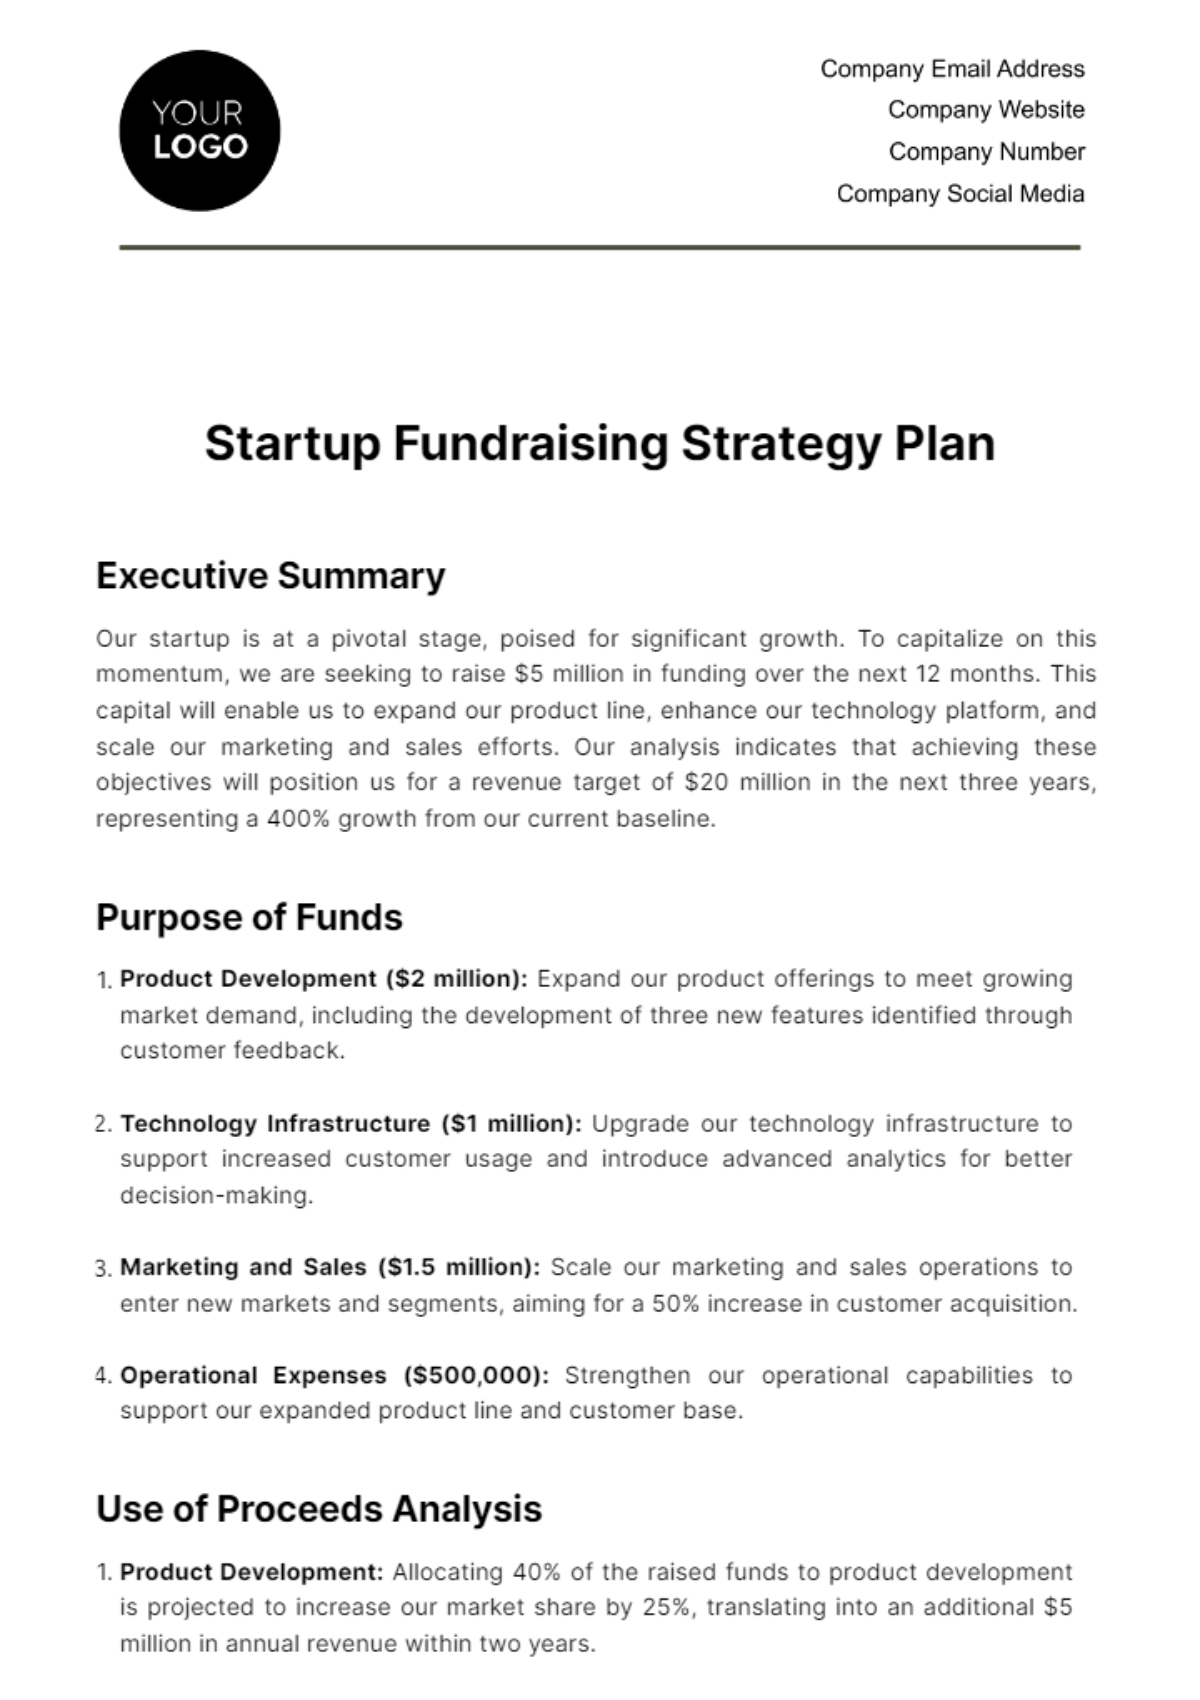 Startup Fundraising Strategy Plan Template